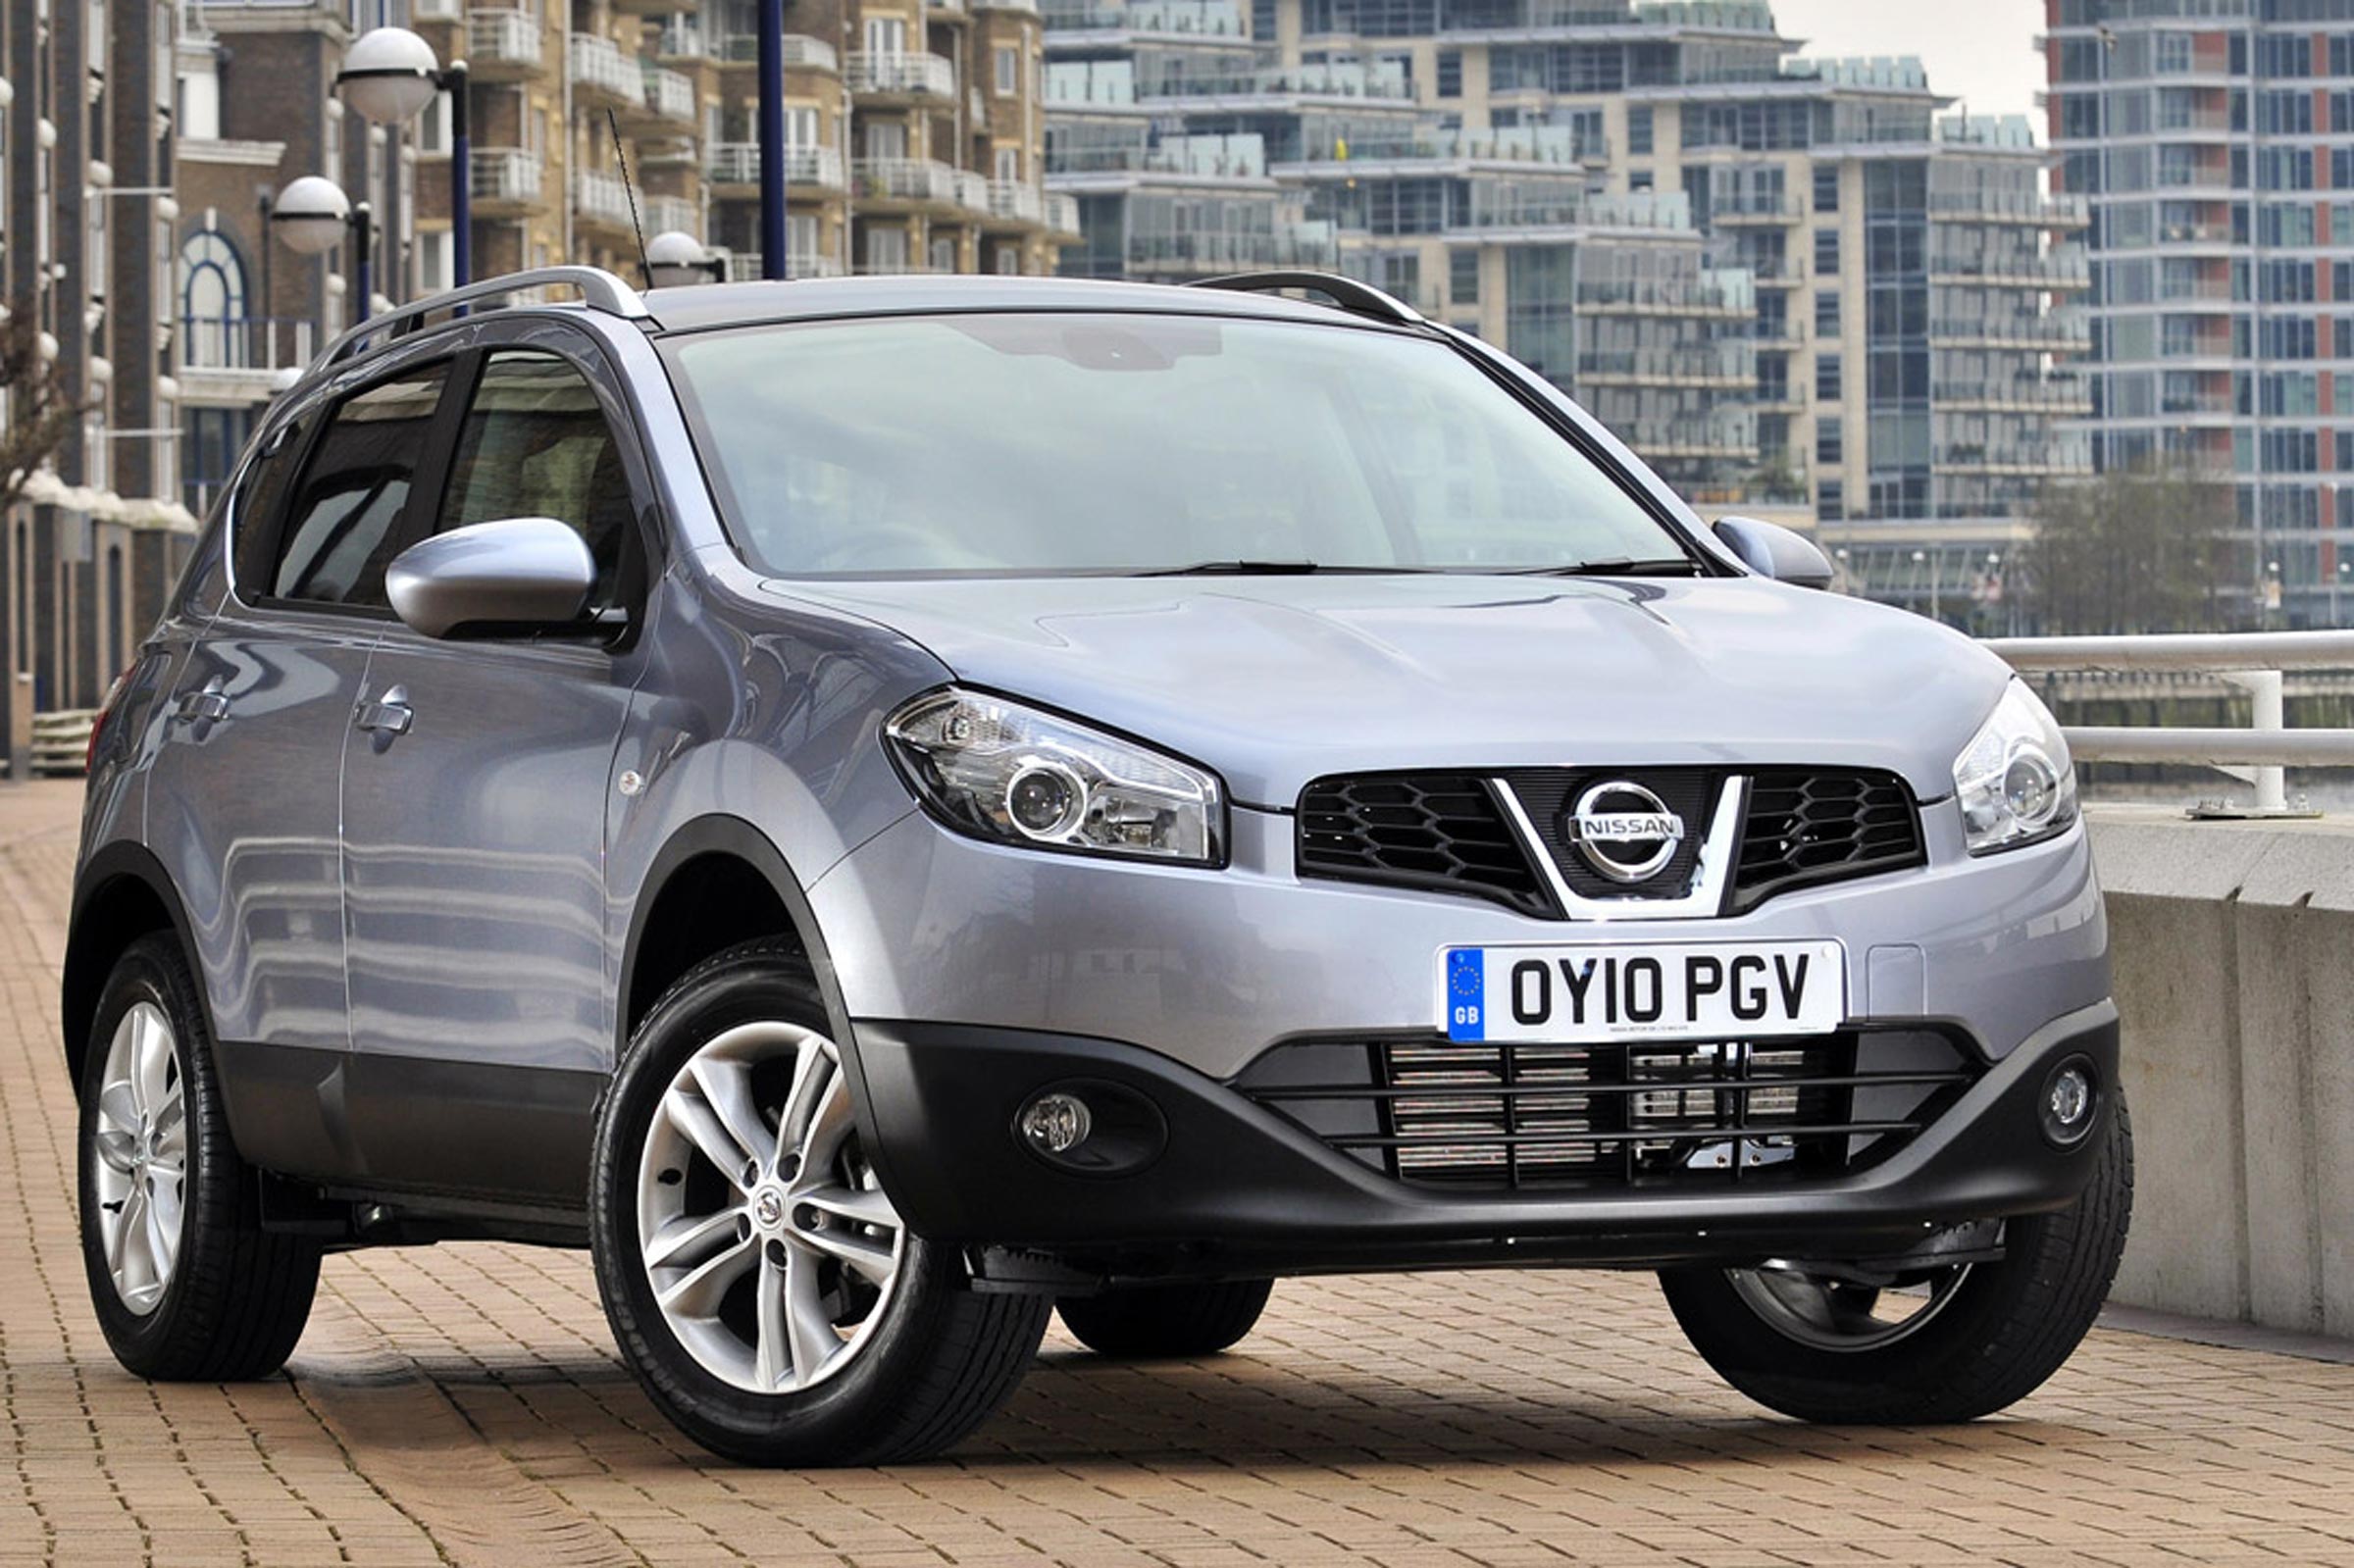 Used Nissan Qashqai 20072013 buying guide pictures Carbuyer